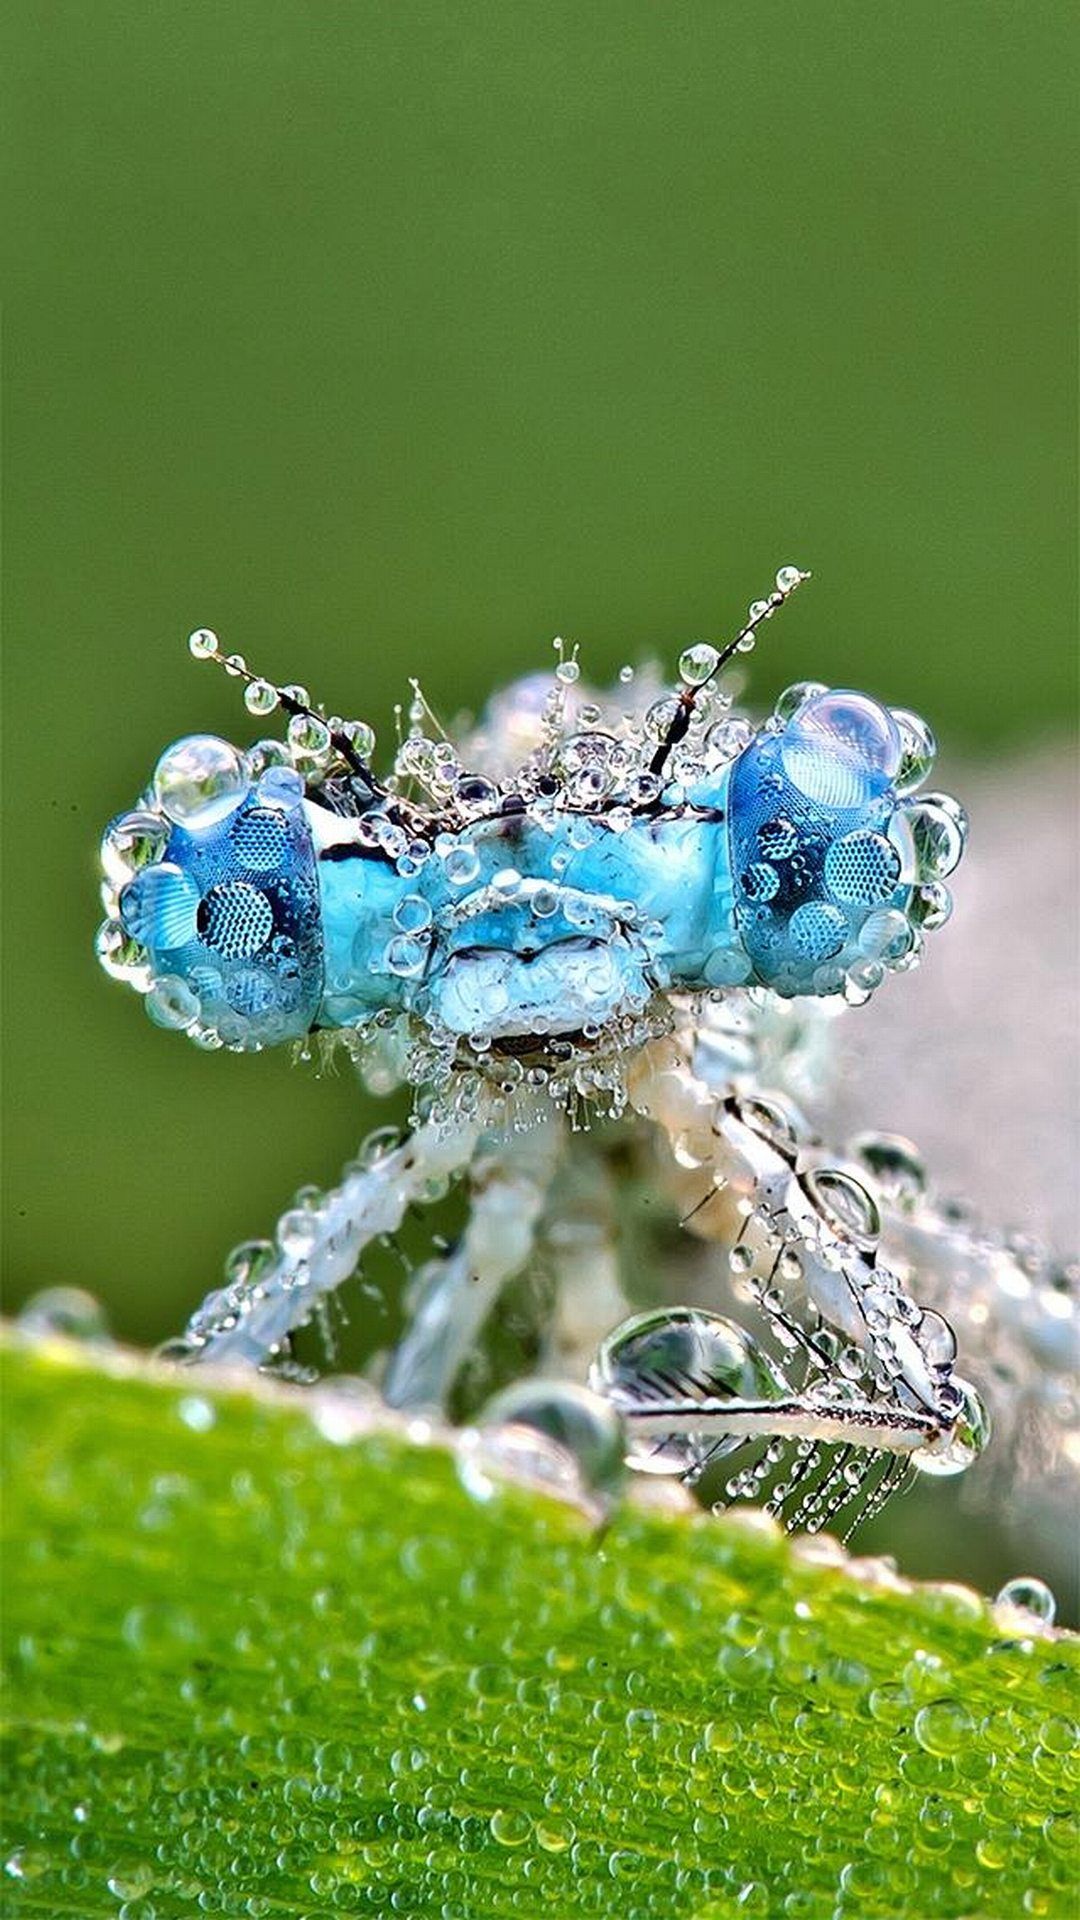 Macro Insects Amazing Photography Of